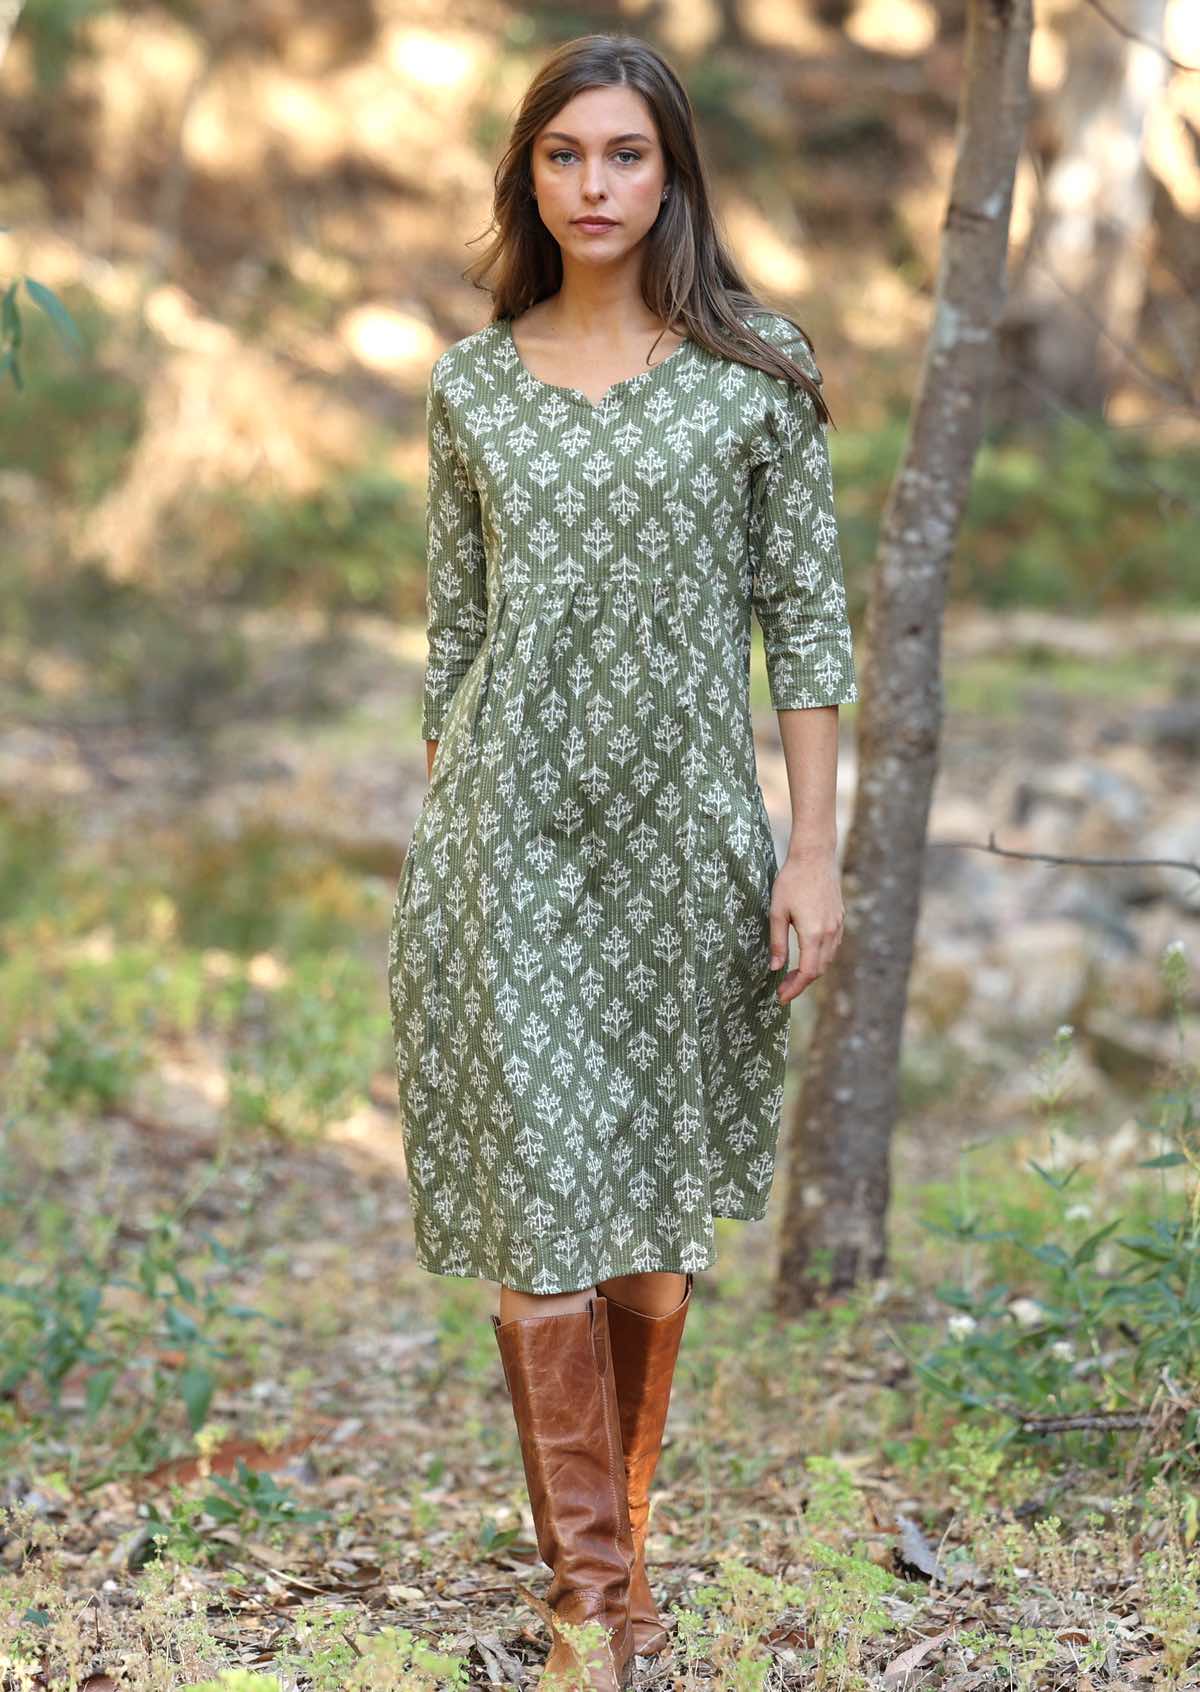 Popular Tilda dress now in this pale green with sweet flowers and kantha stitches